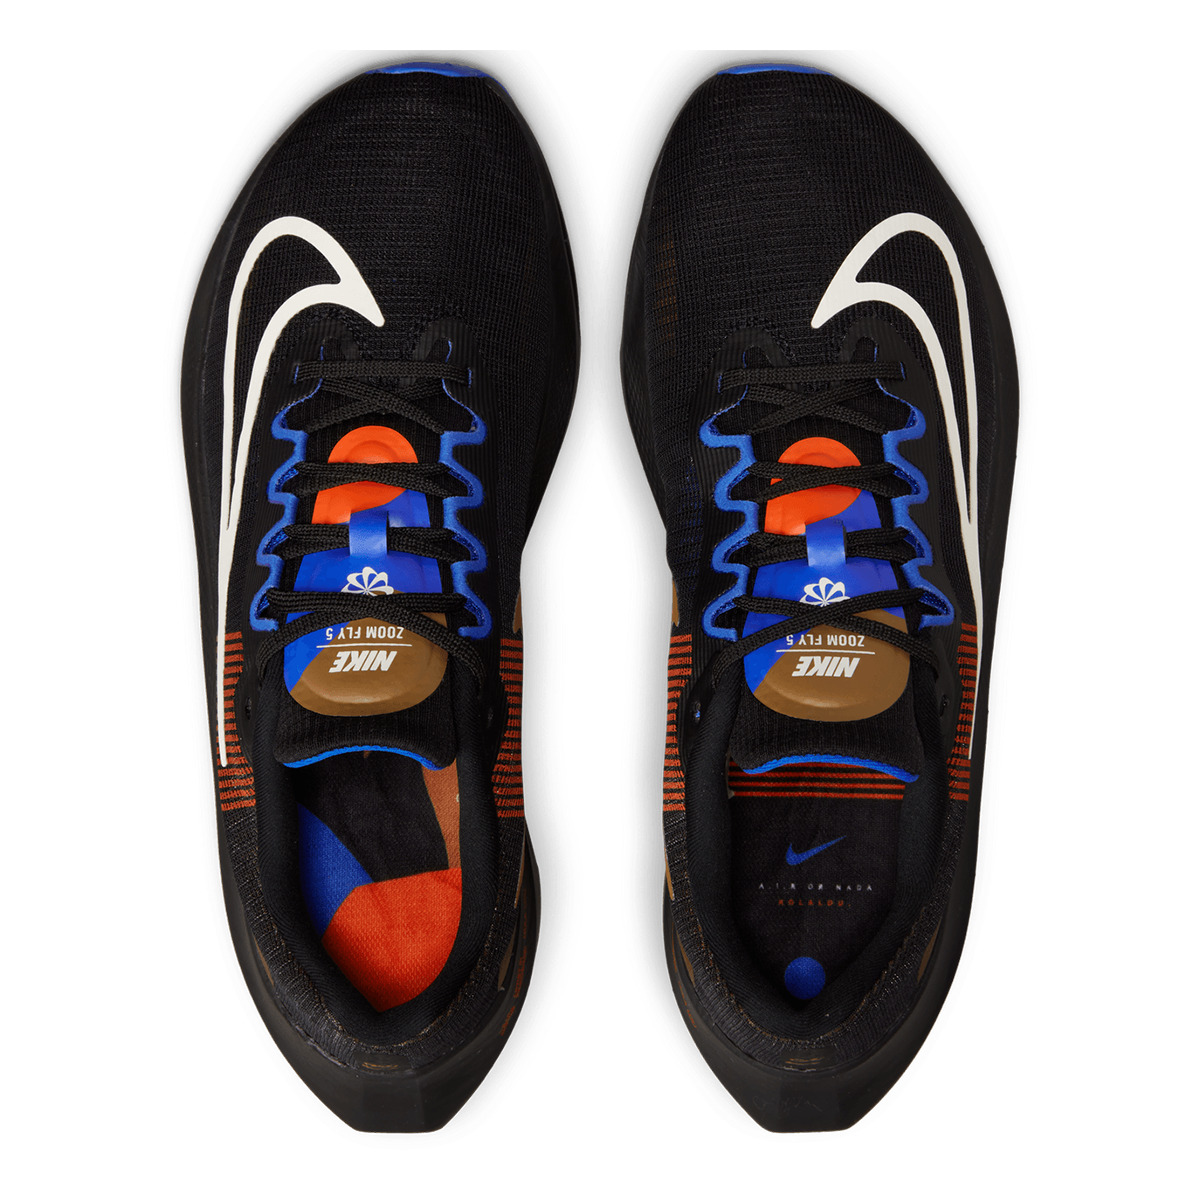 Kolibrie Circulaire Negen Nike Zoom Fly 5 A.I.R. Hola Lou